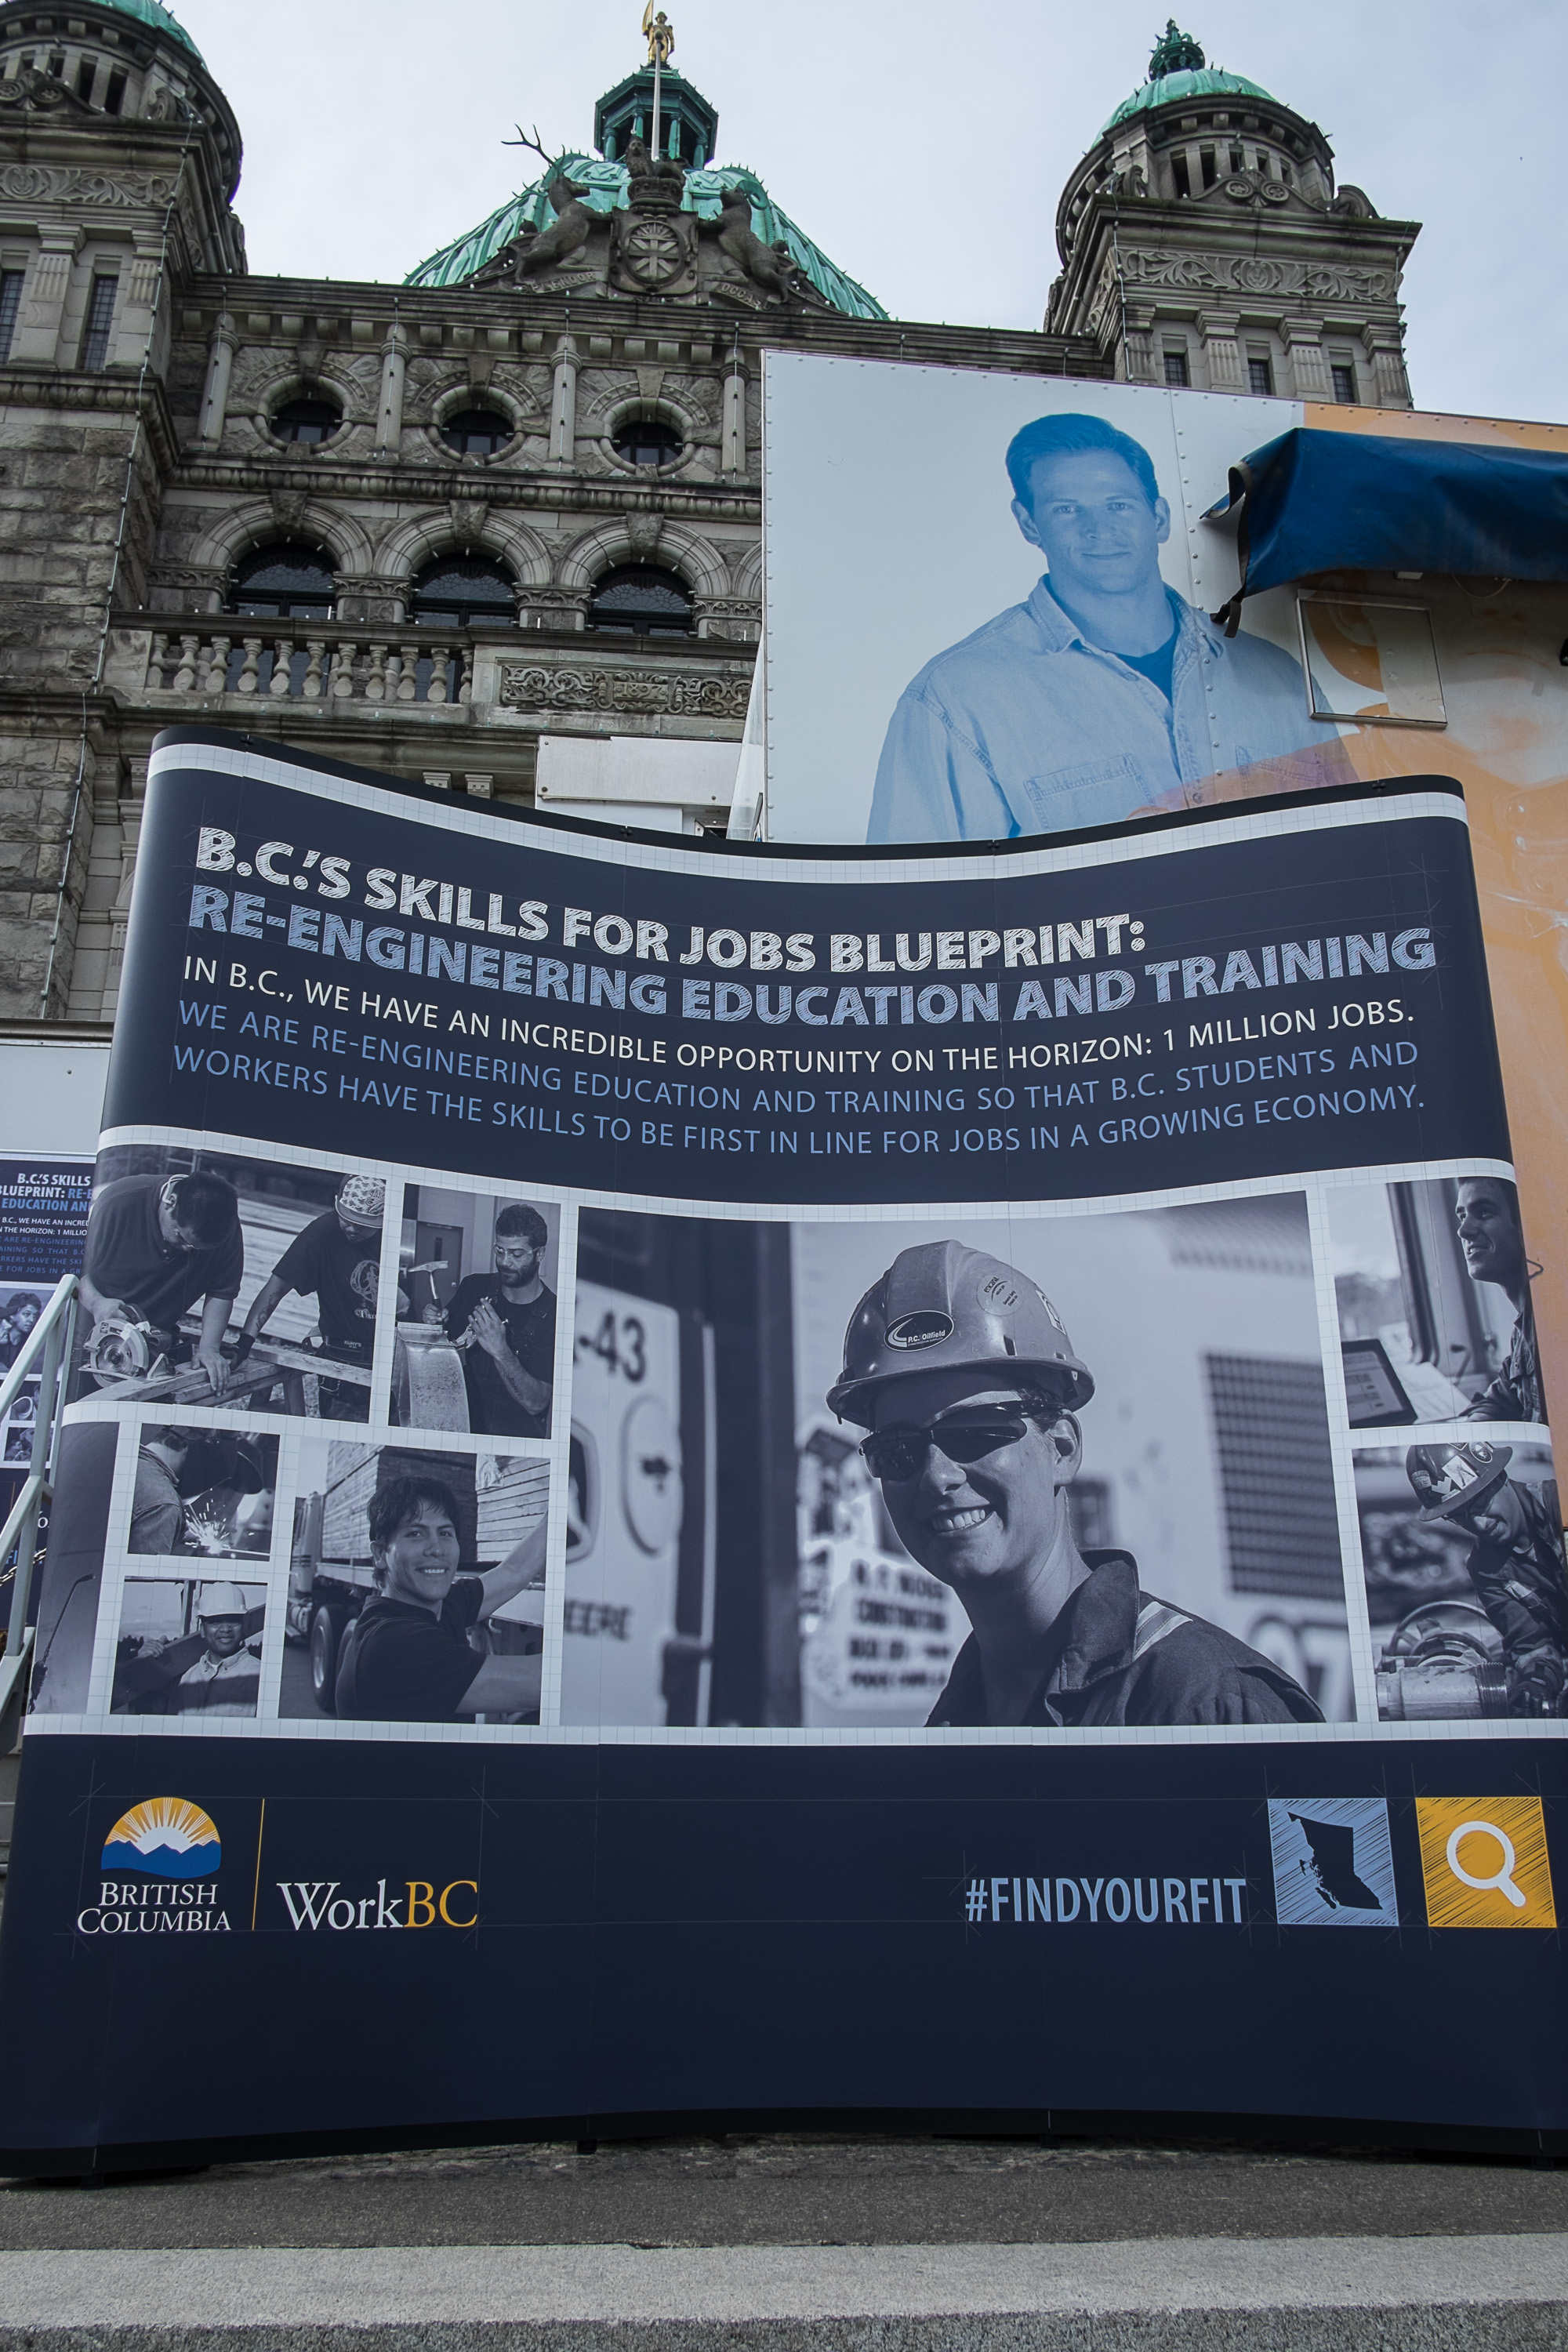 B.C. Launches Skills for Jobs Blueprint to re-engineer education and training